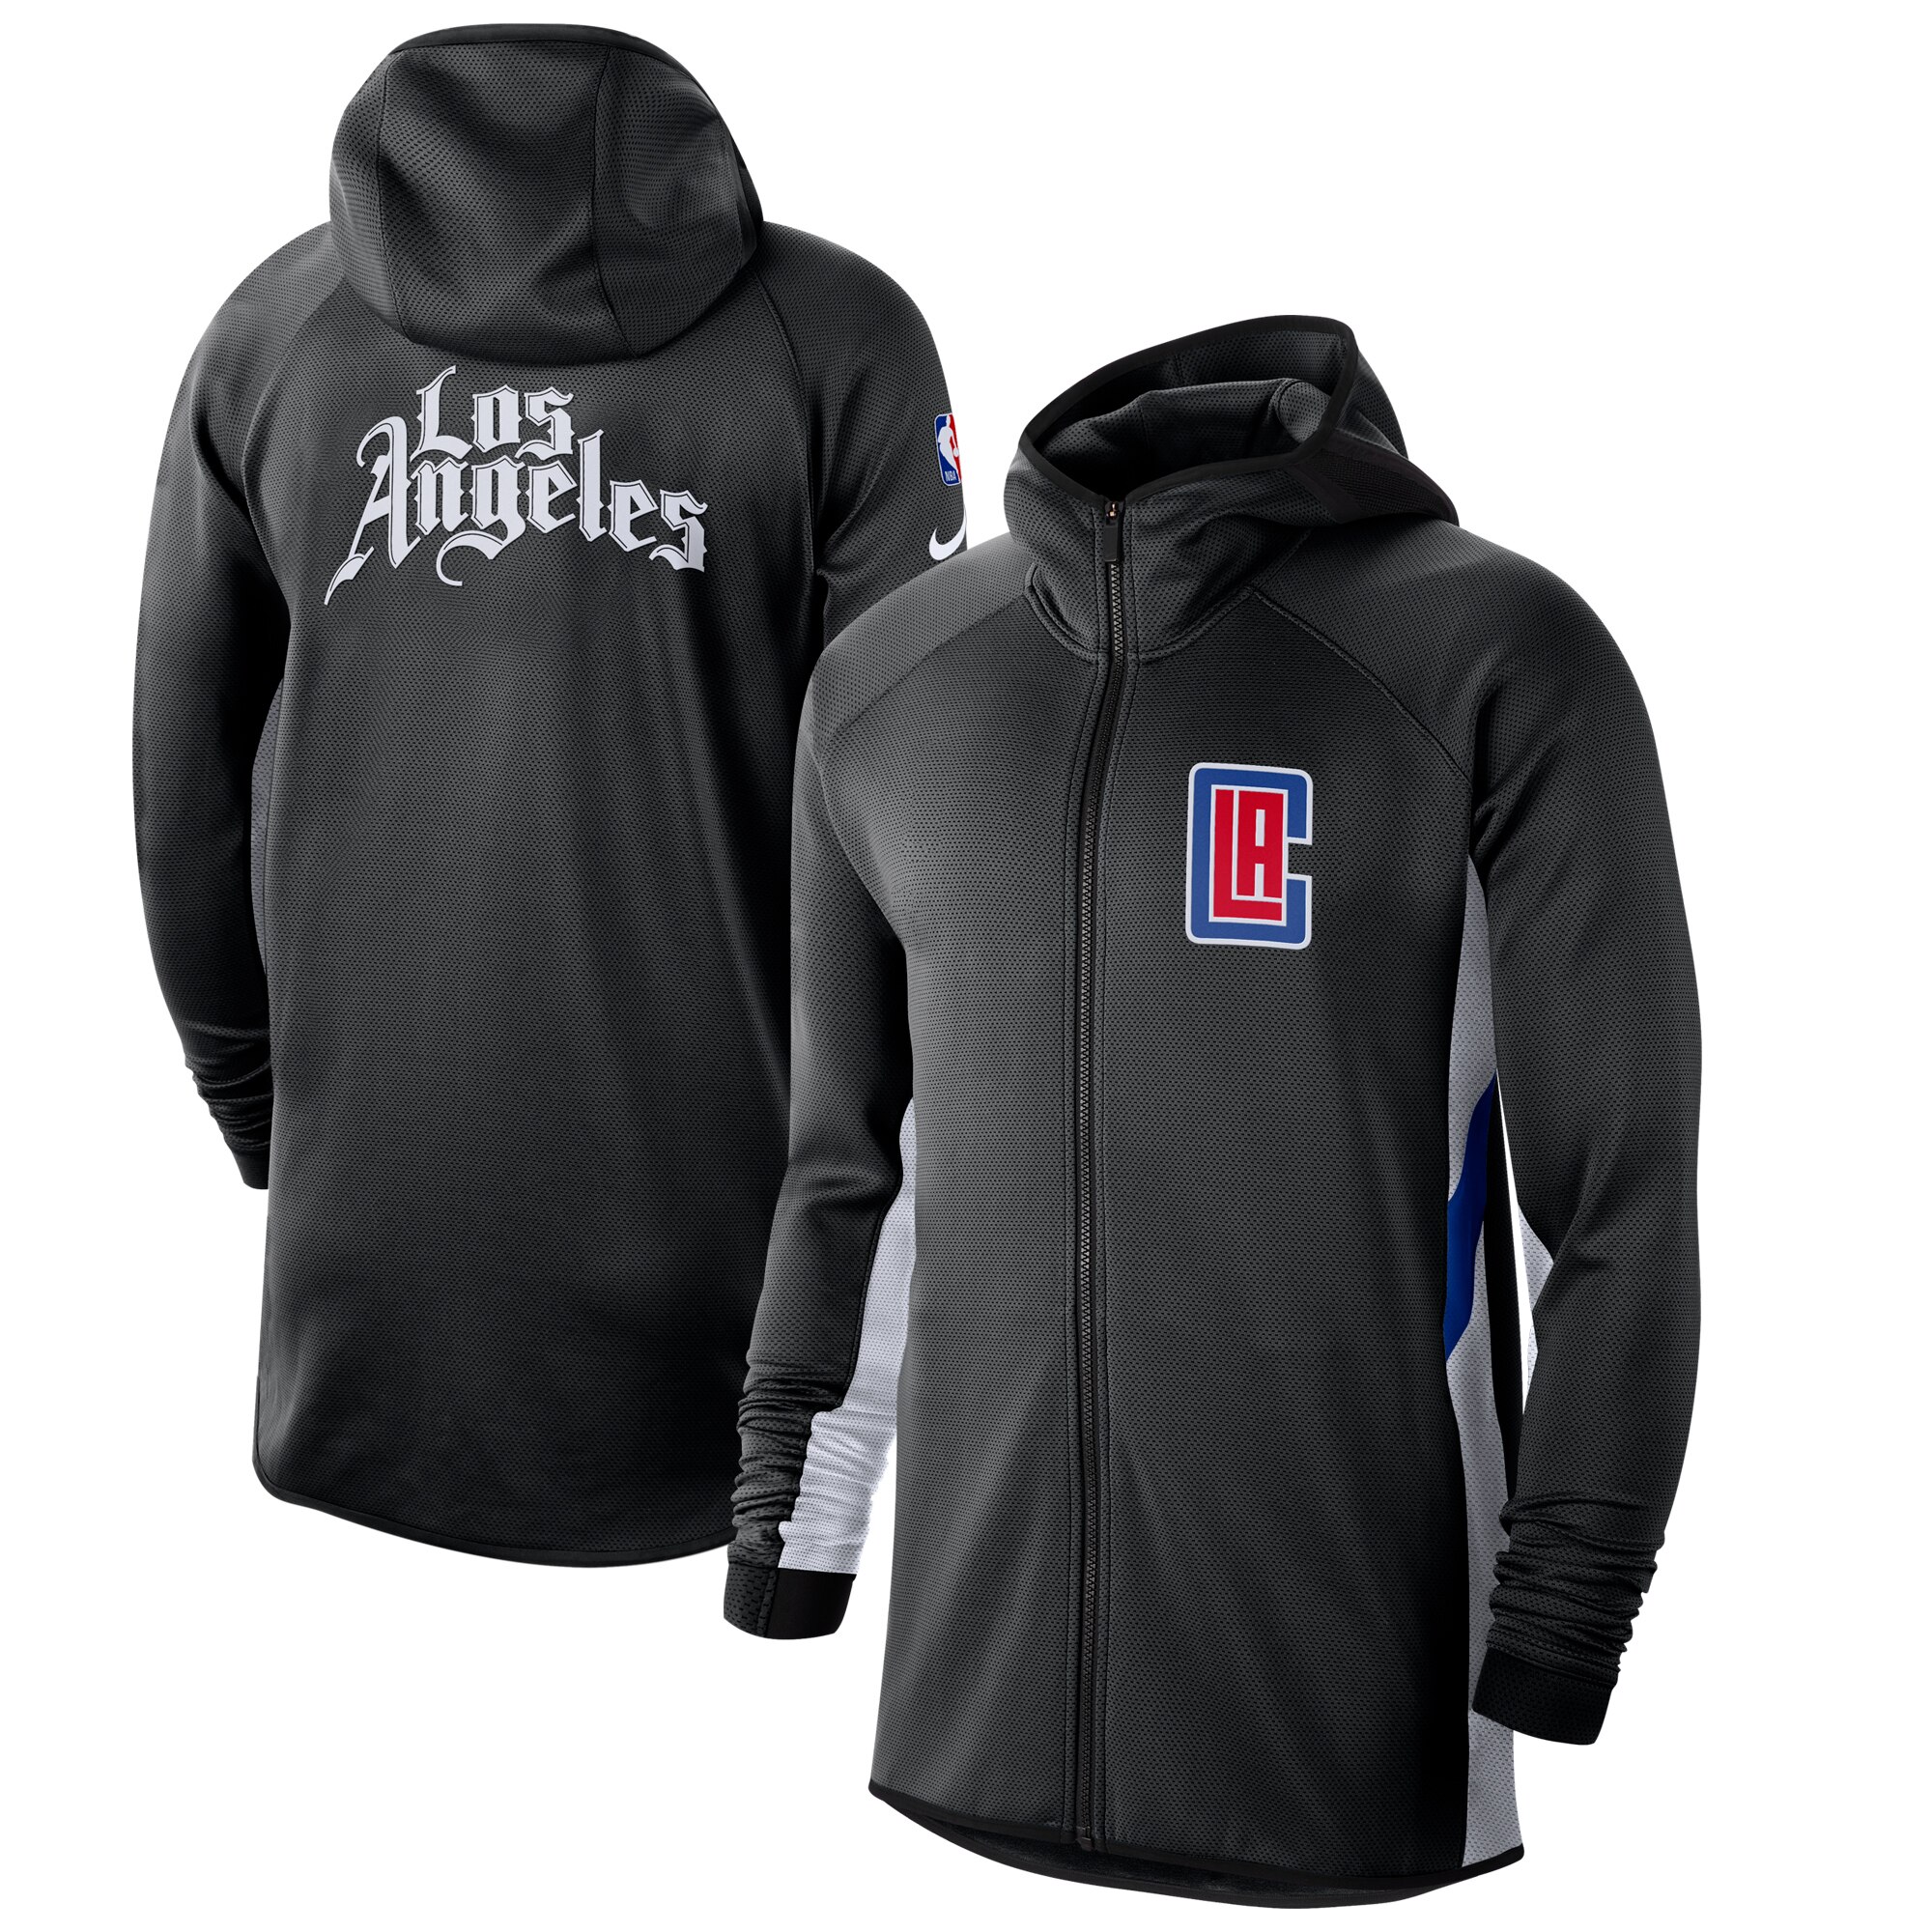 Cheap Men Nike LA Clippers Black White 201920 Earned Edition Showtime FullZip Performance Hoodie